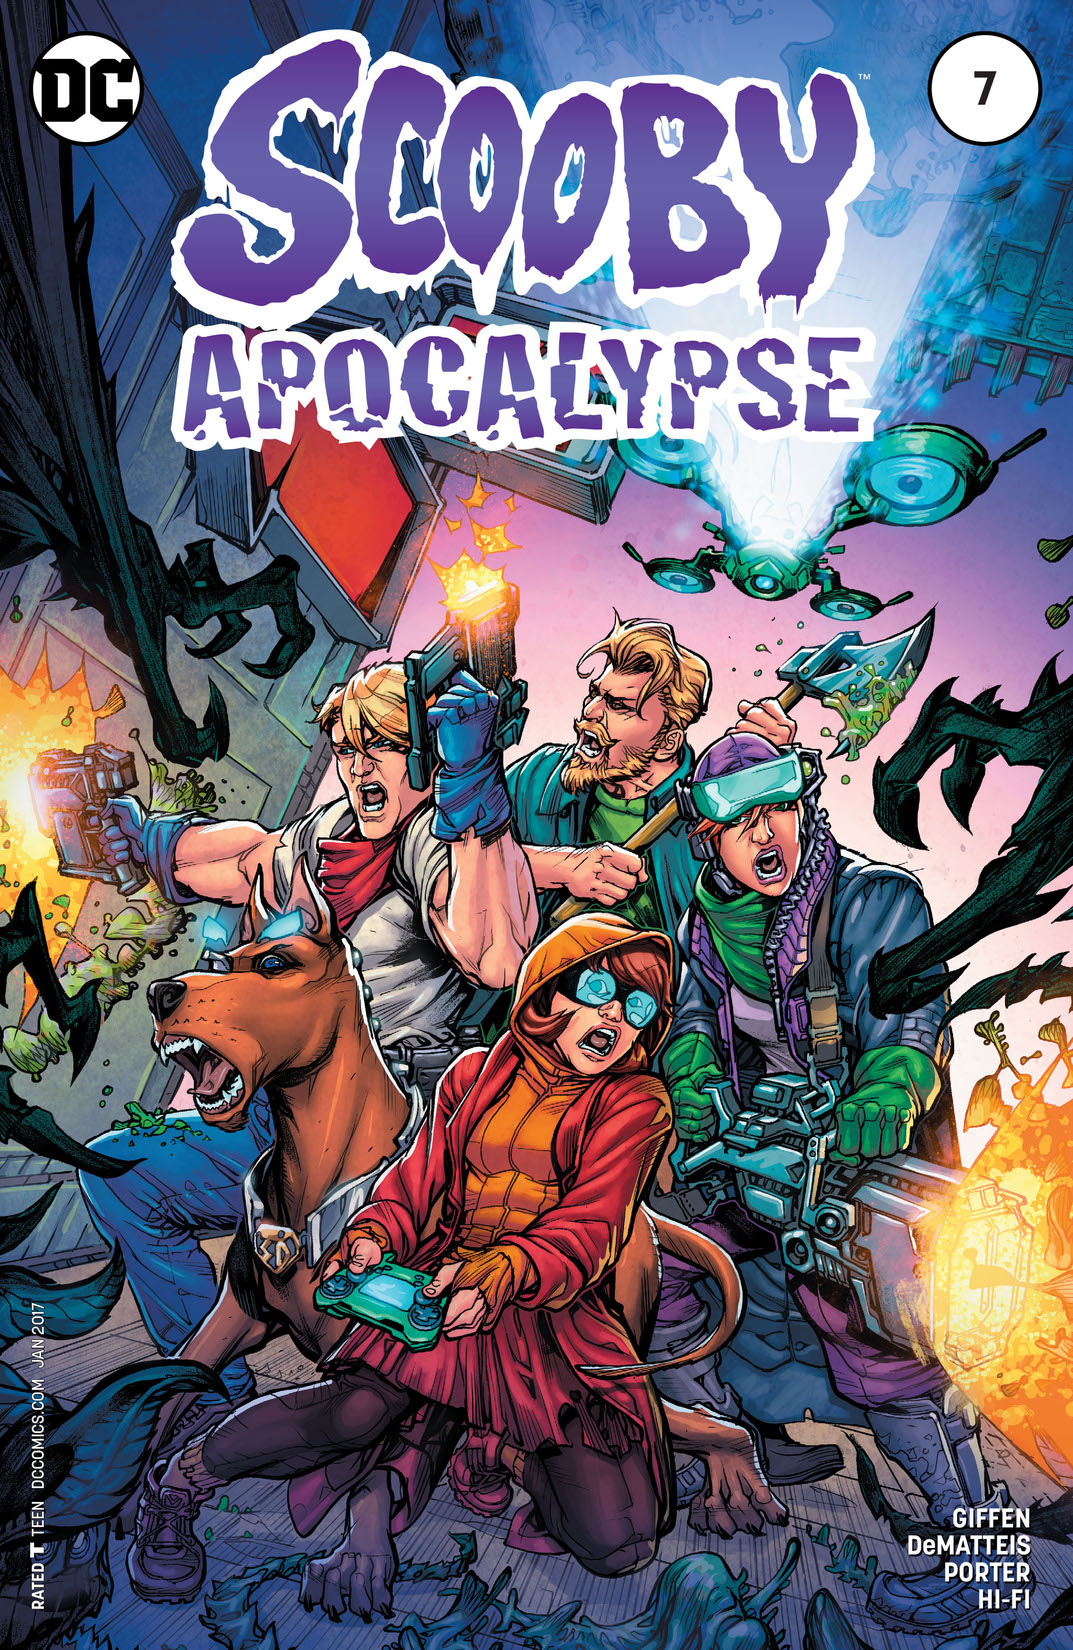 Scooby Apocalypse #7 preview images